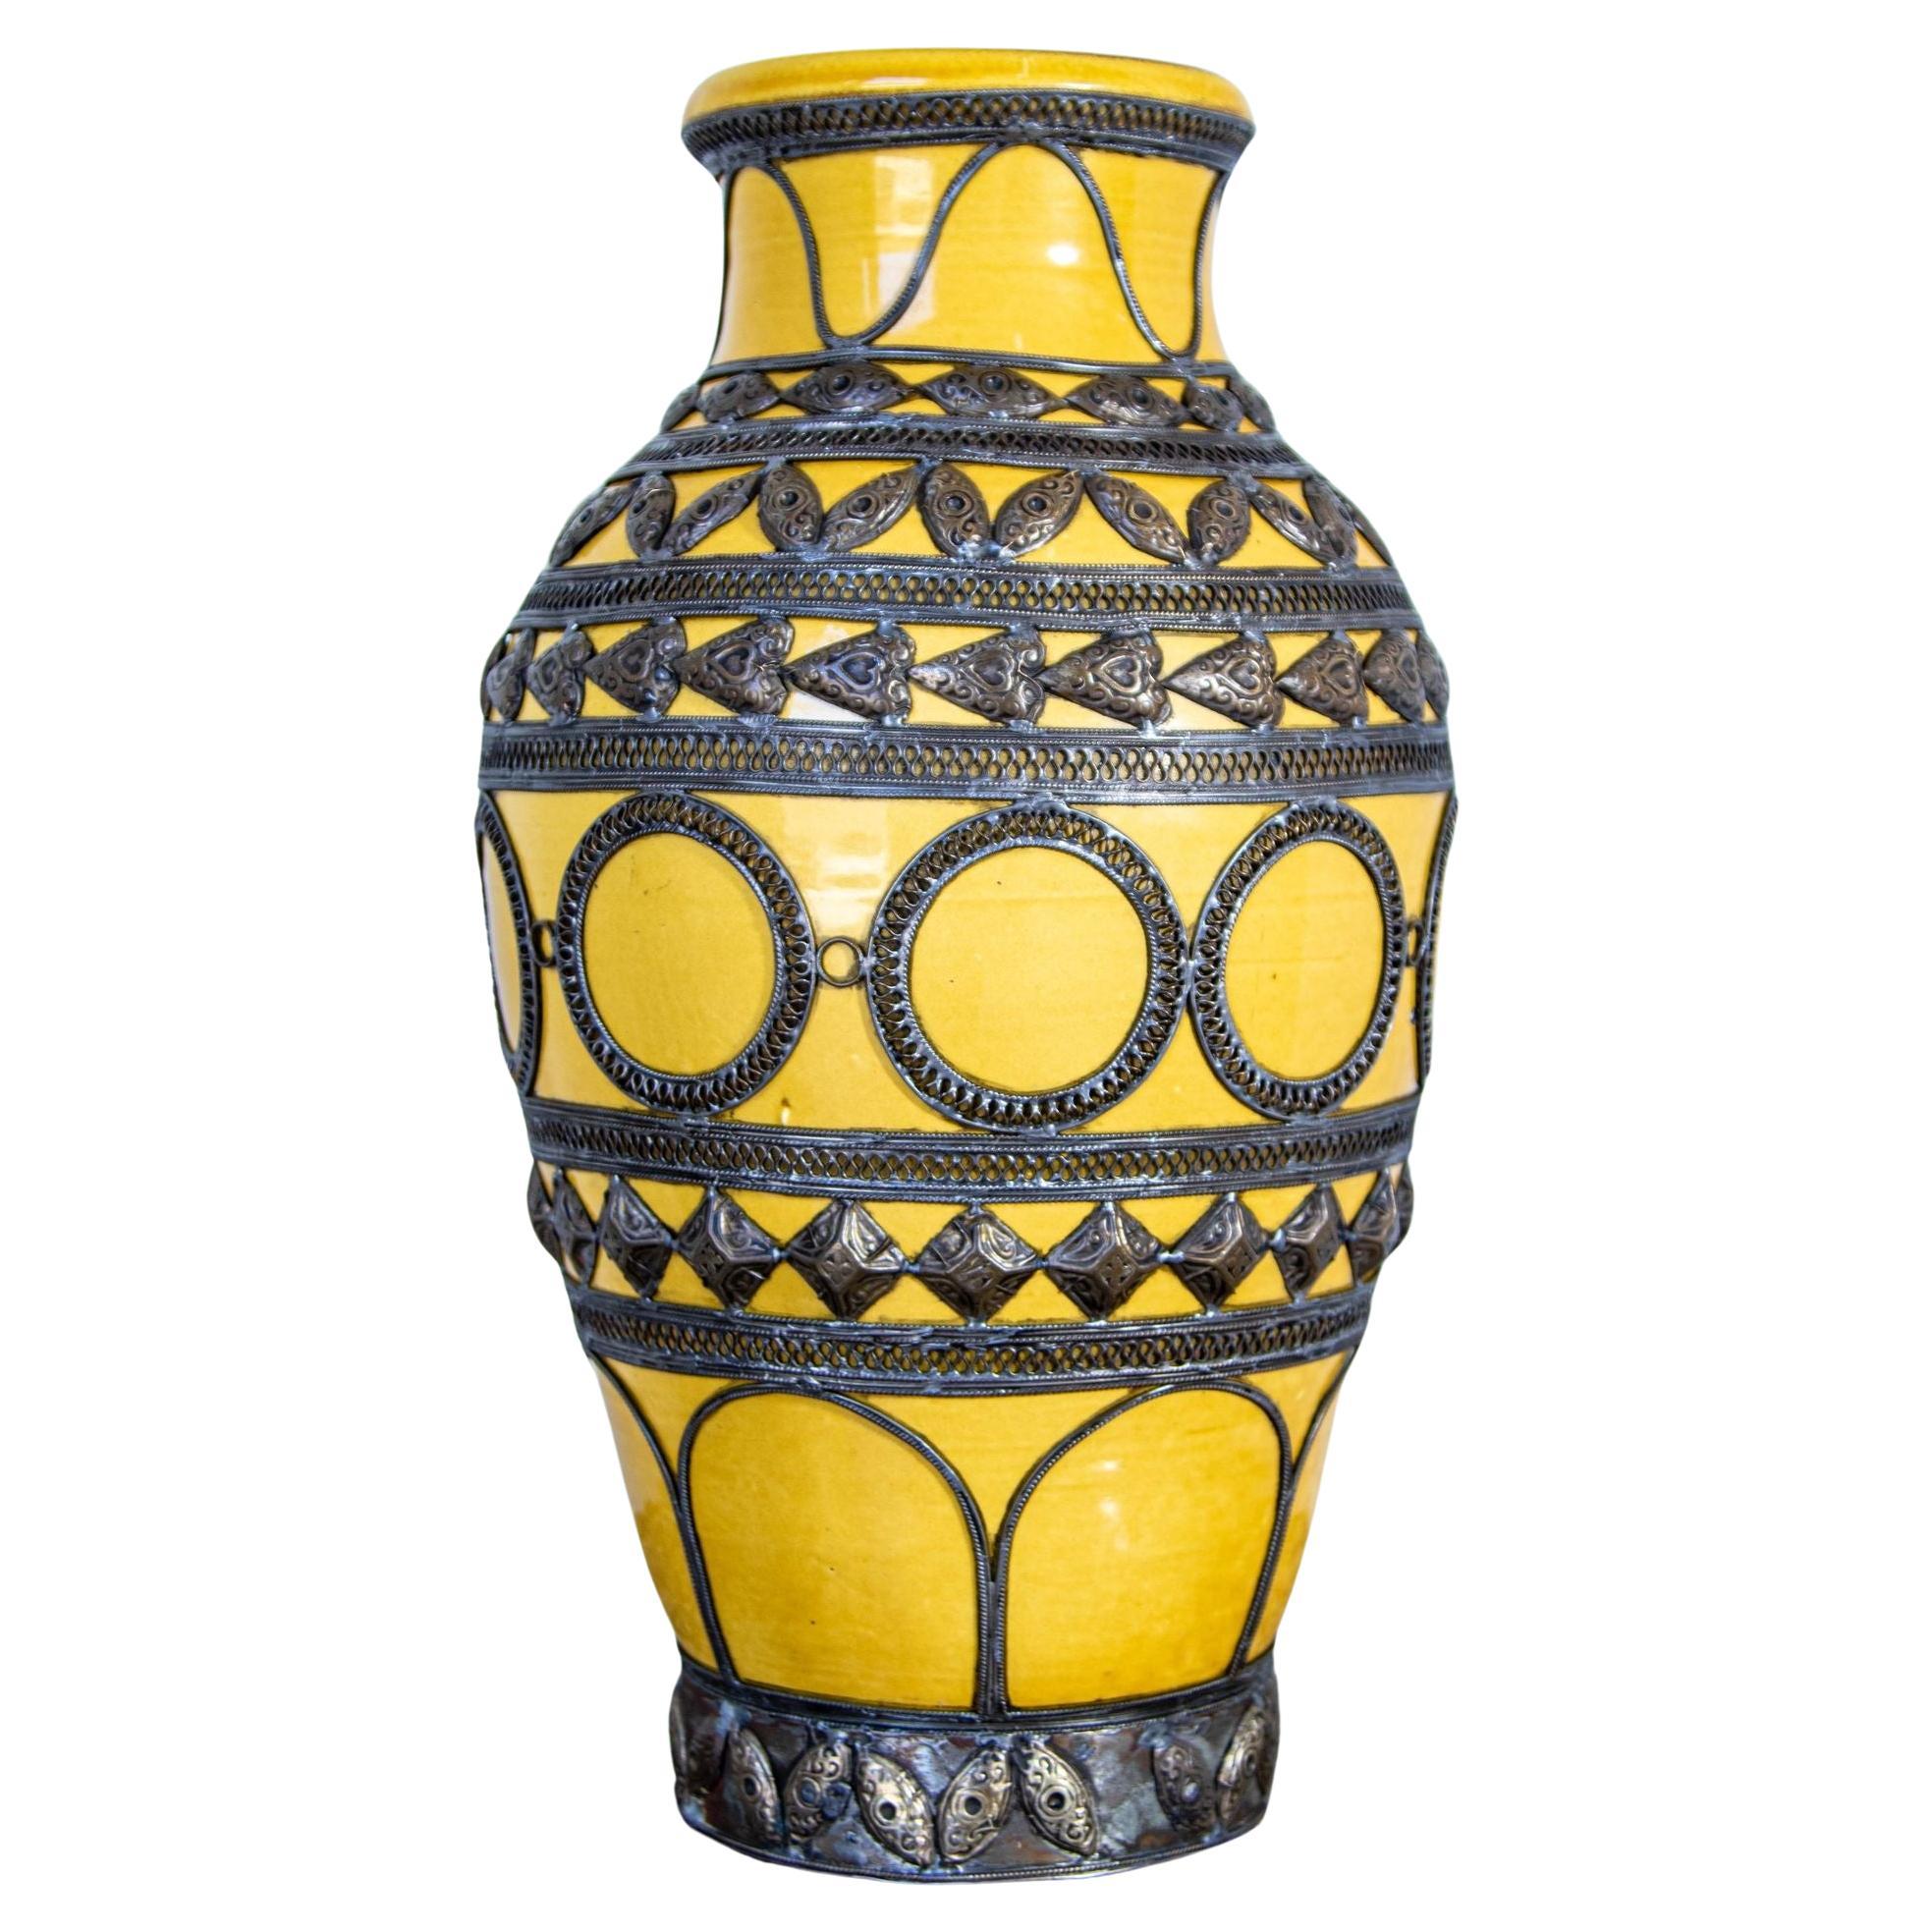 Berber Tribes of Morocco Vases and Vessels